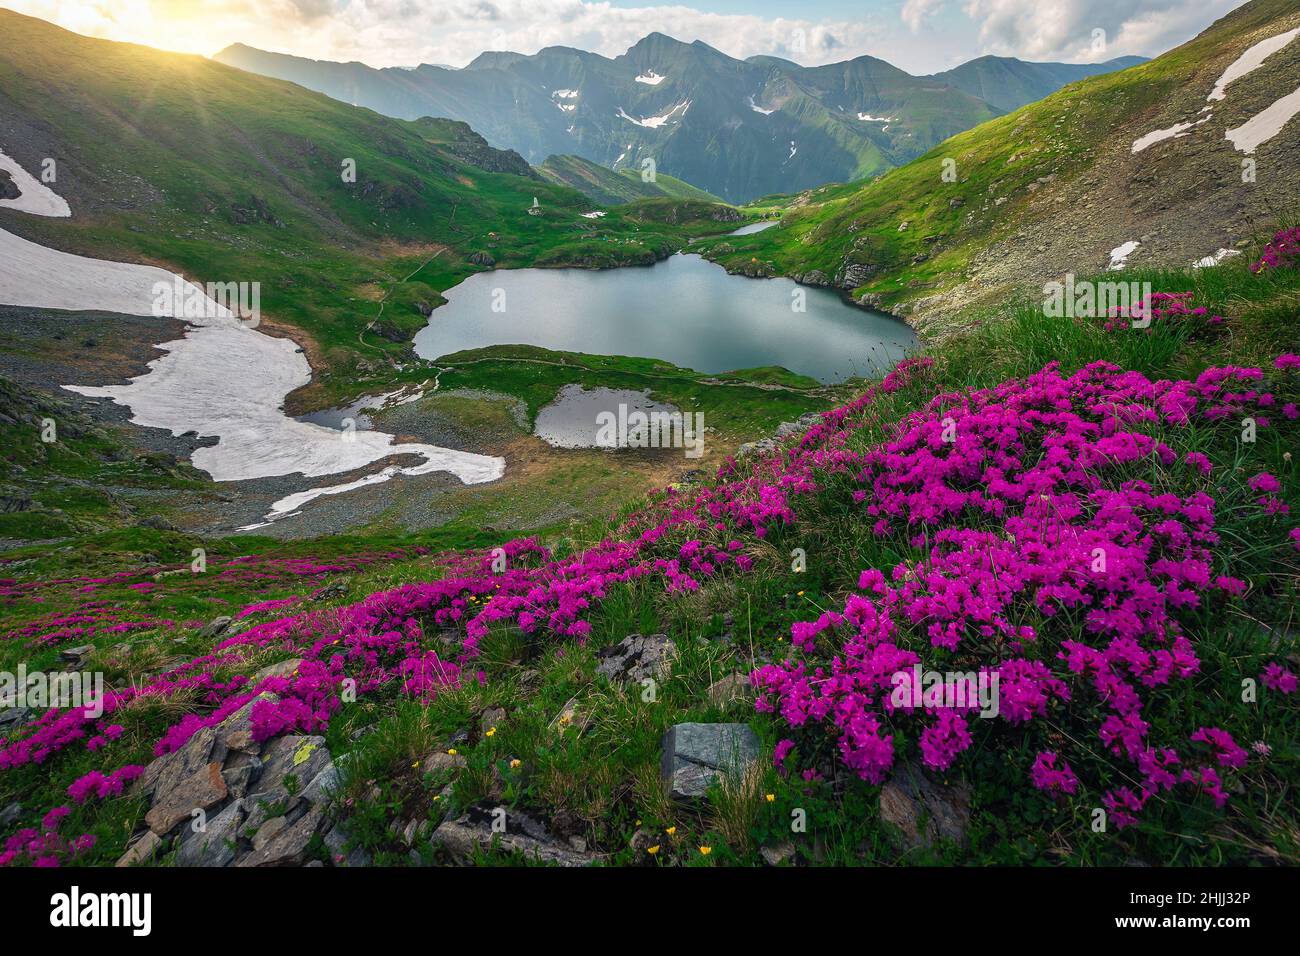 One of the most beautiful nature scenery at early summer. Stunning view with lake Capra and blooming rhododendron flowers on the hills, Fagaras mounta Stock Photo